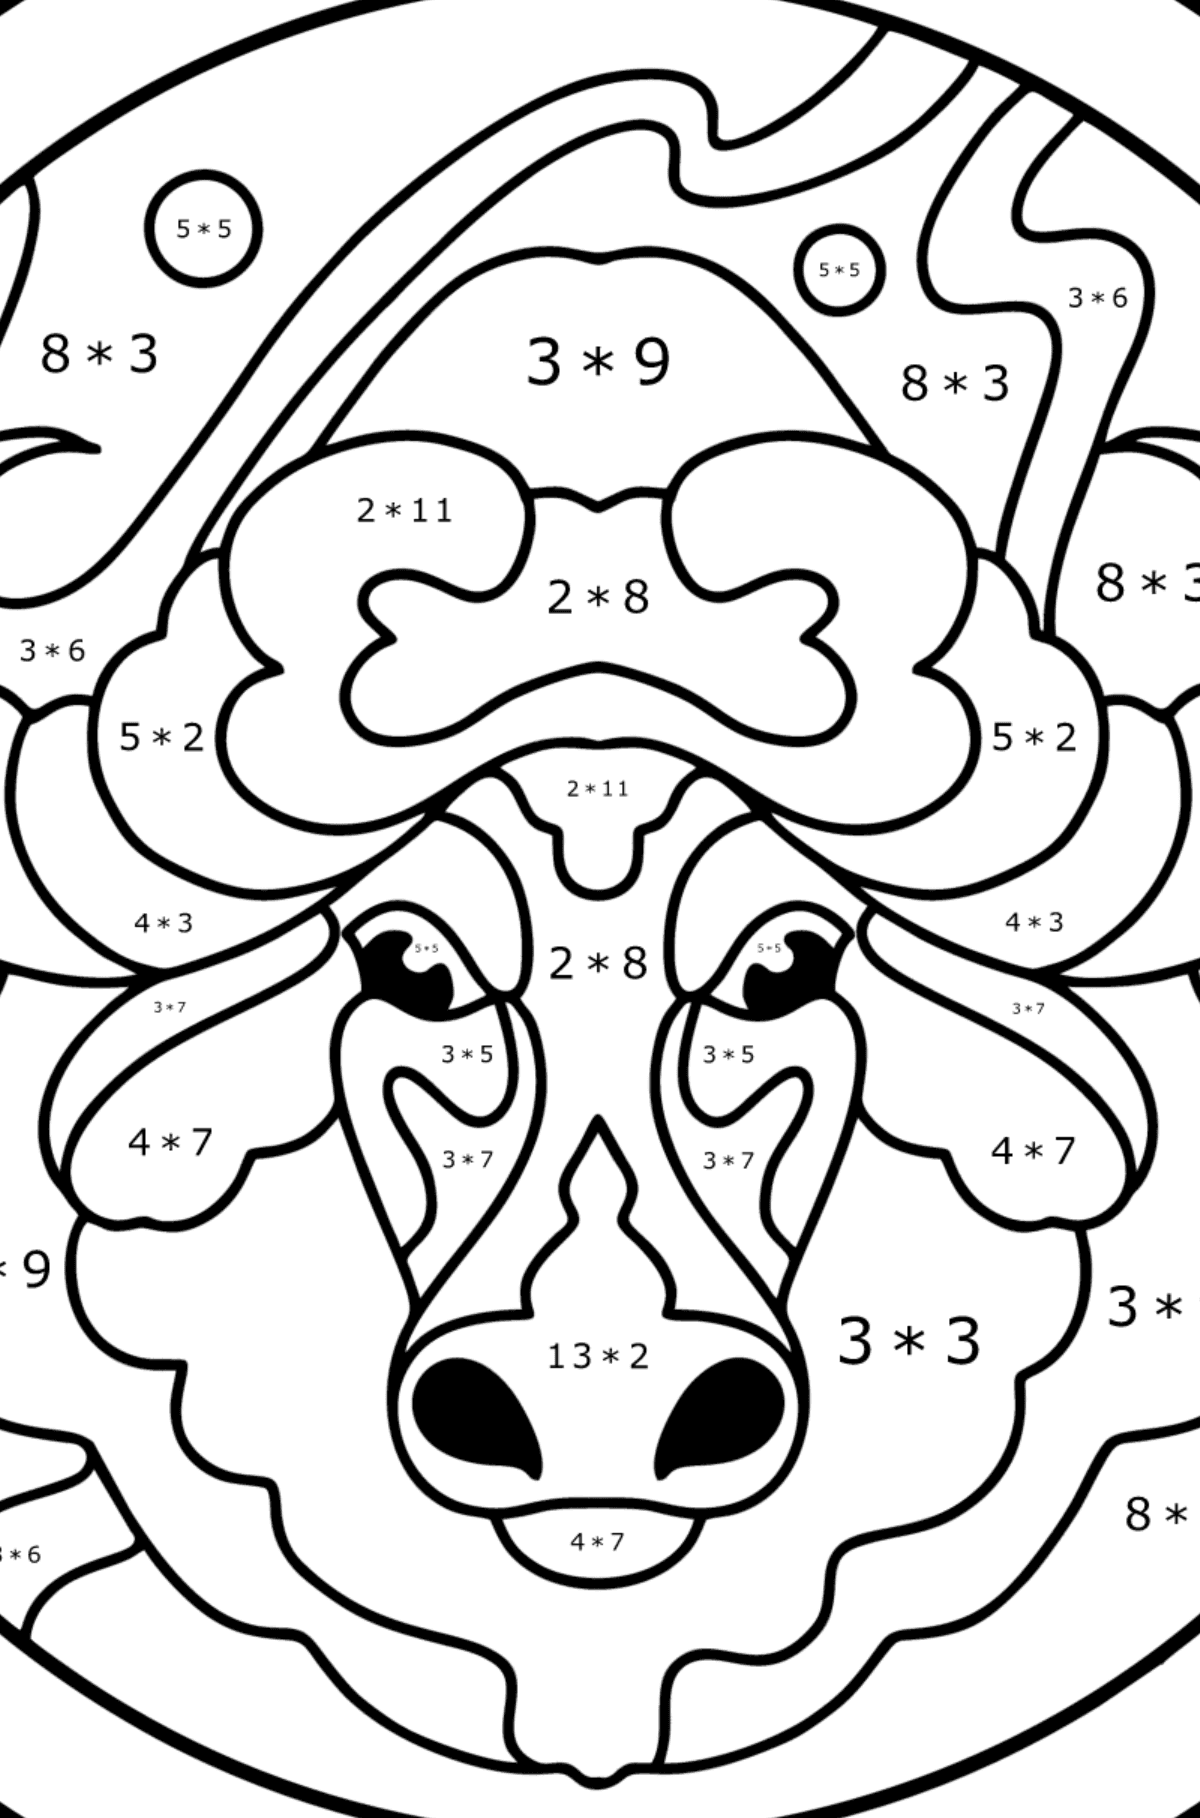 Coloring page for kids - zodiac sign Taurus - Math Coloring - Multiplication for Kids